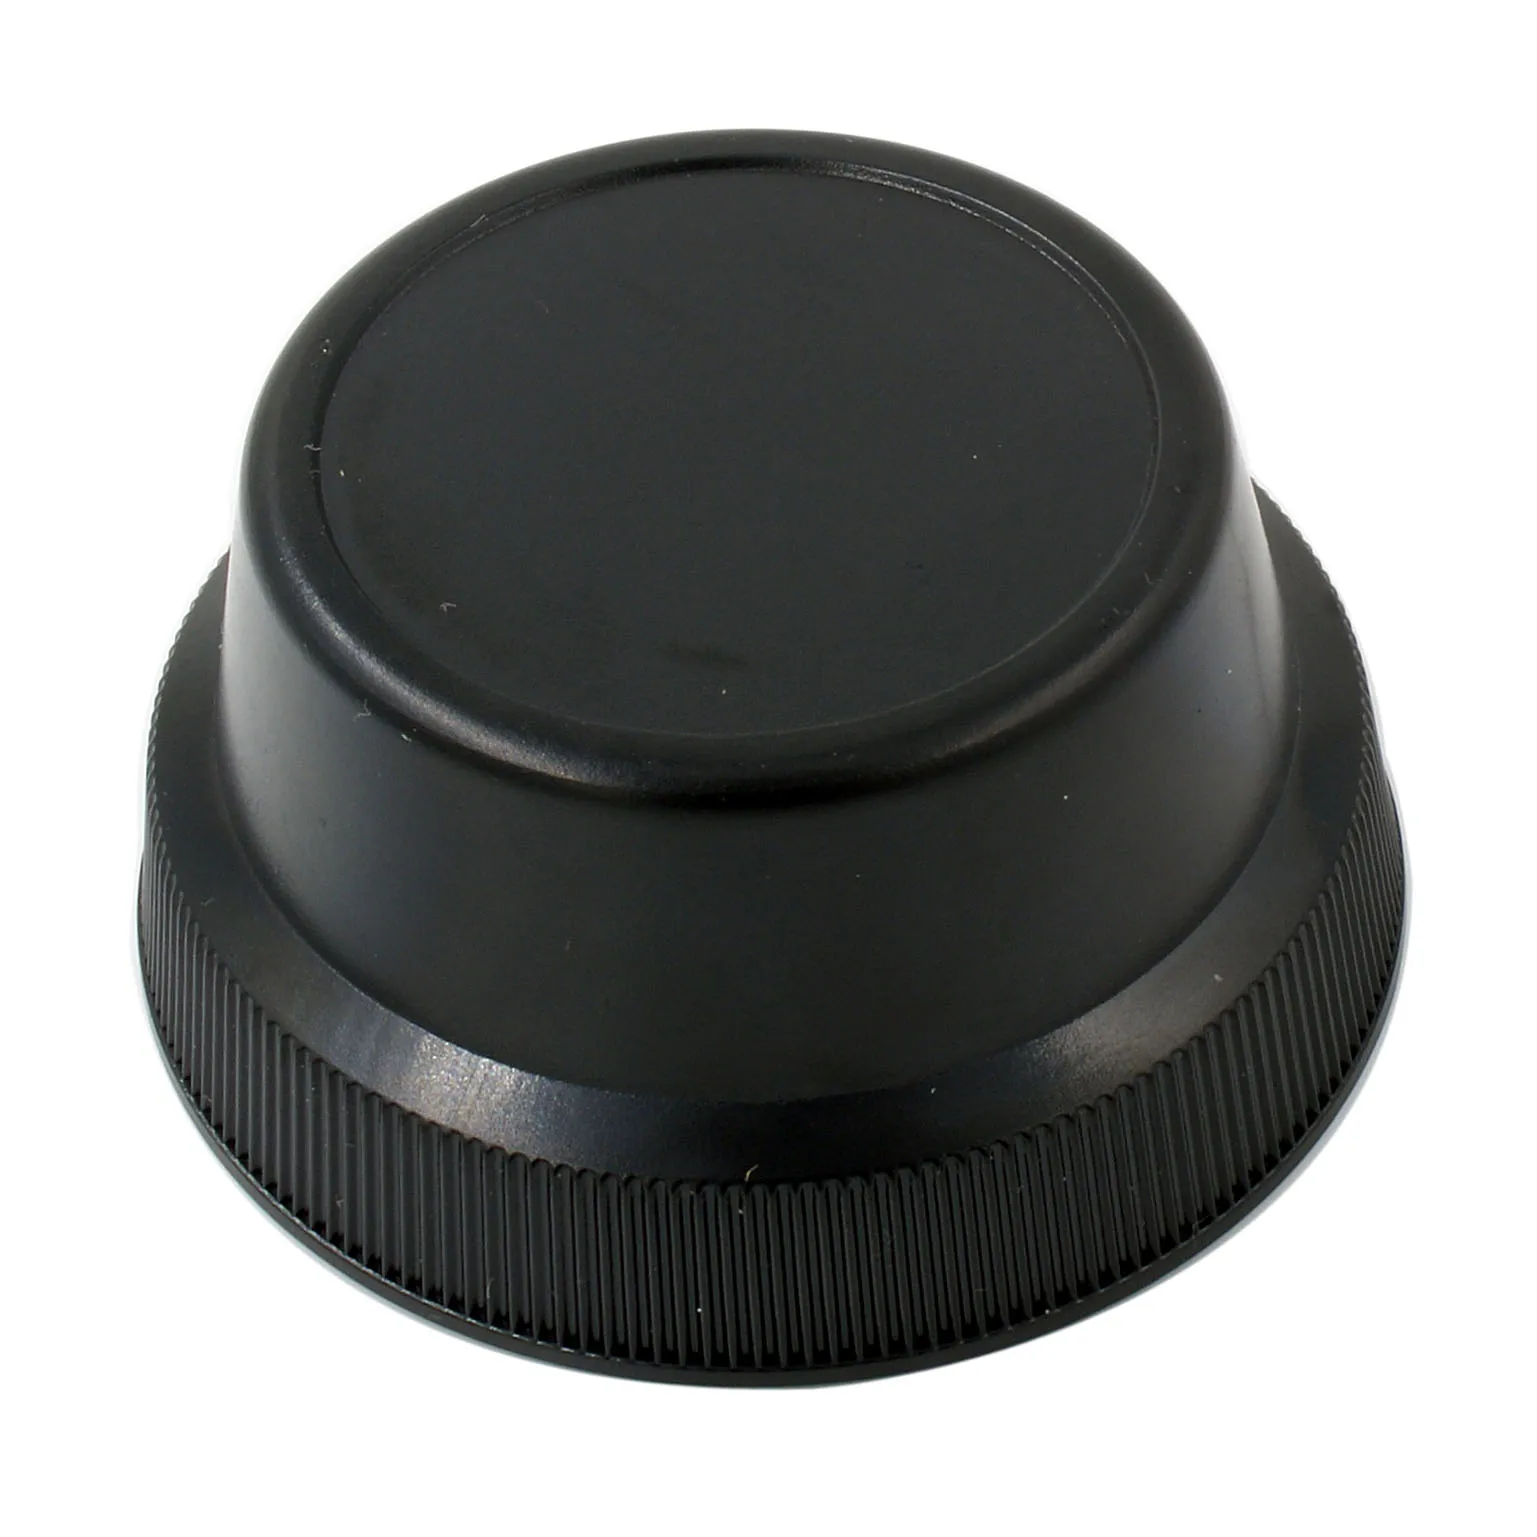 

Camera Lens Rear Cap for Contax G Mount 16 21 28 35 45 90 35-70mm GK-R2 G1 G2 45mm 90mm replacement